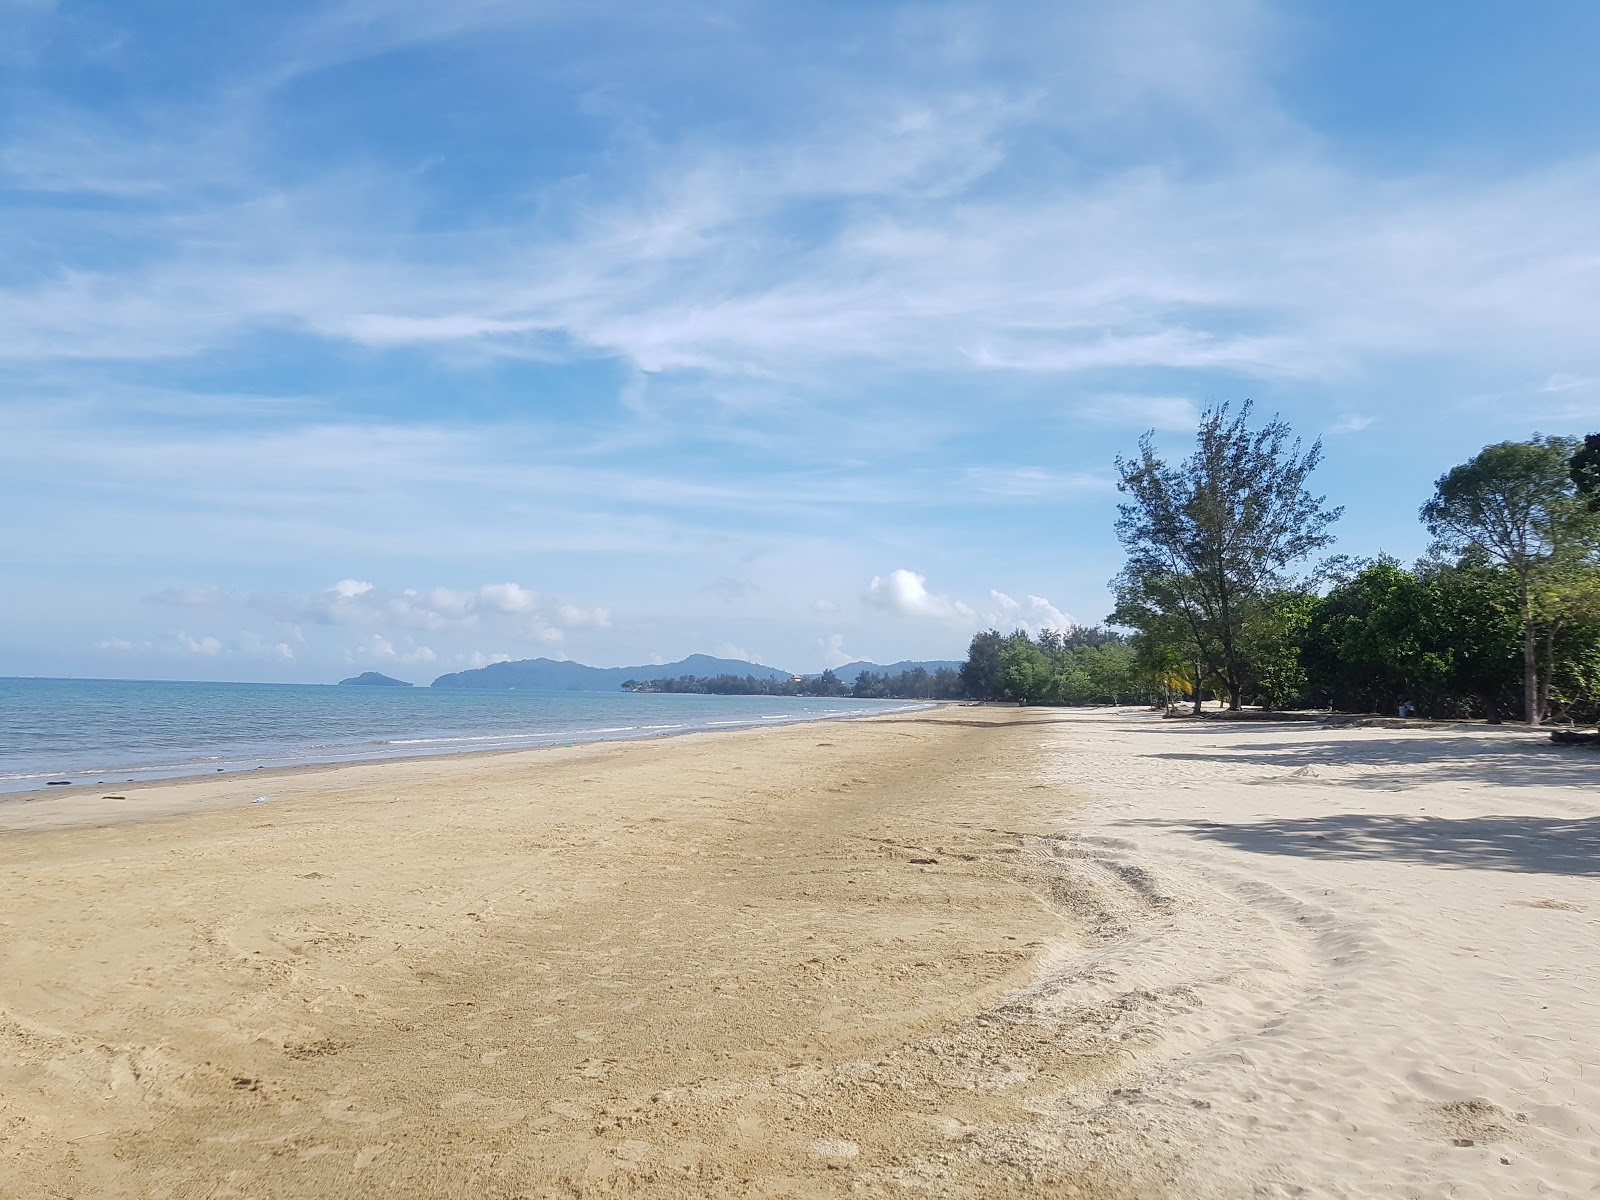 Photo of Tanjung Aru Beach with long straight shore